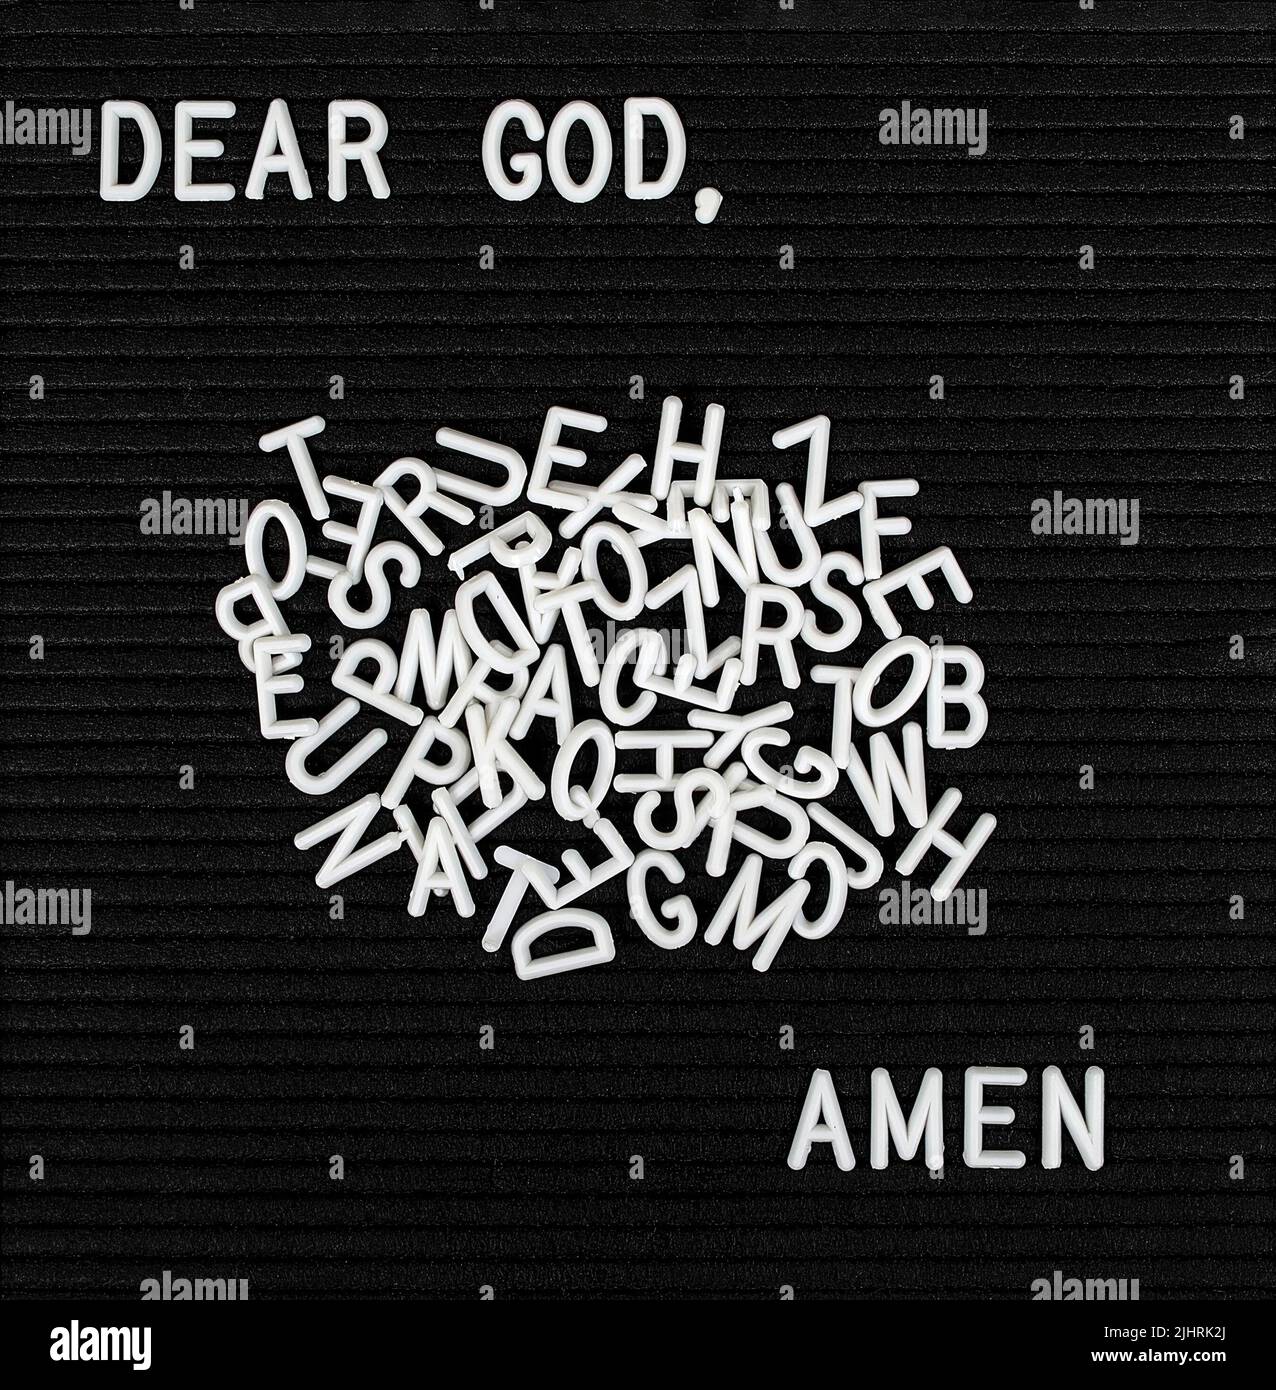 Prayer with scattered plastic white letters on a black felt bulletin board Stock Photo